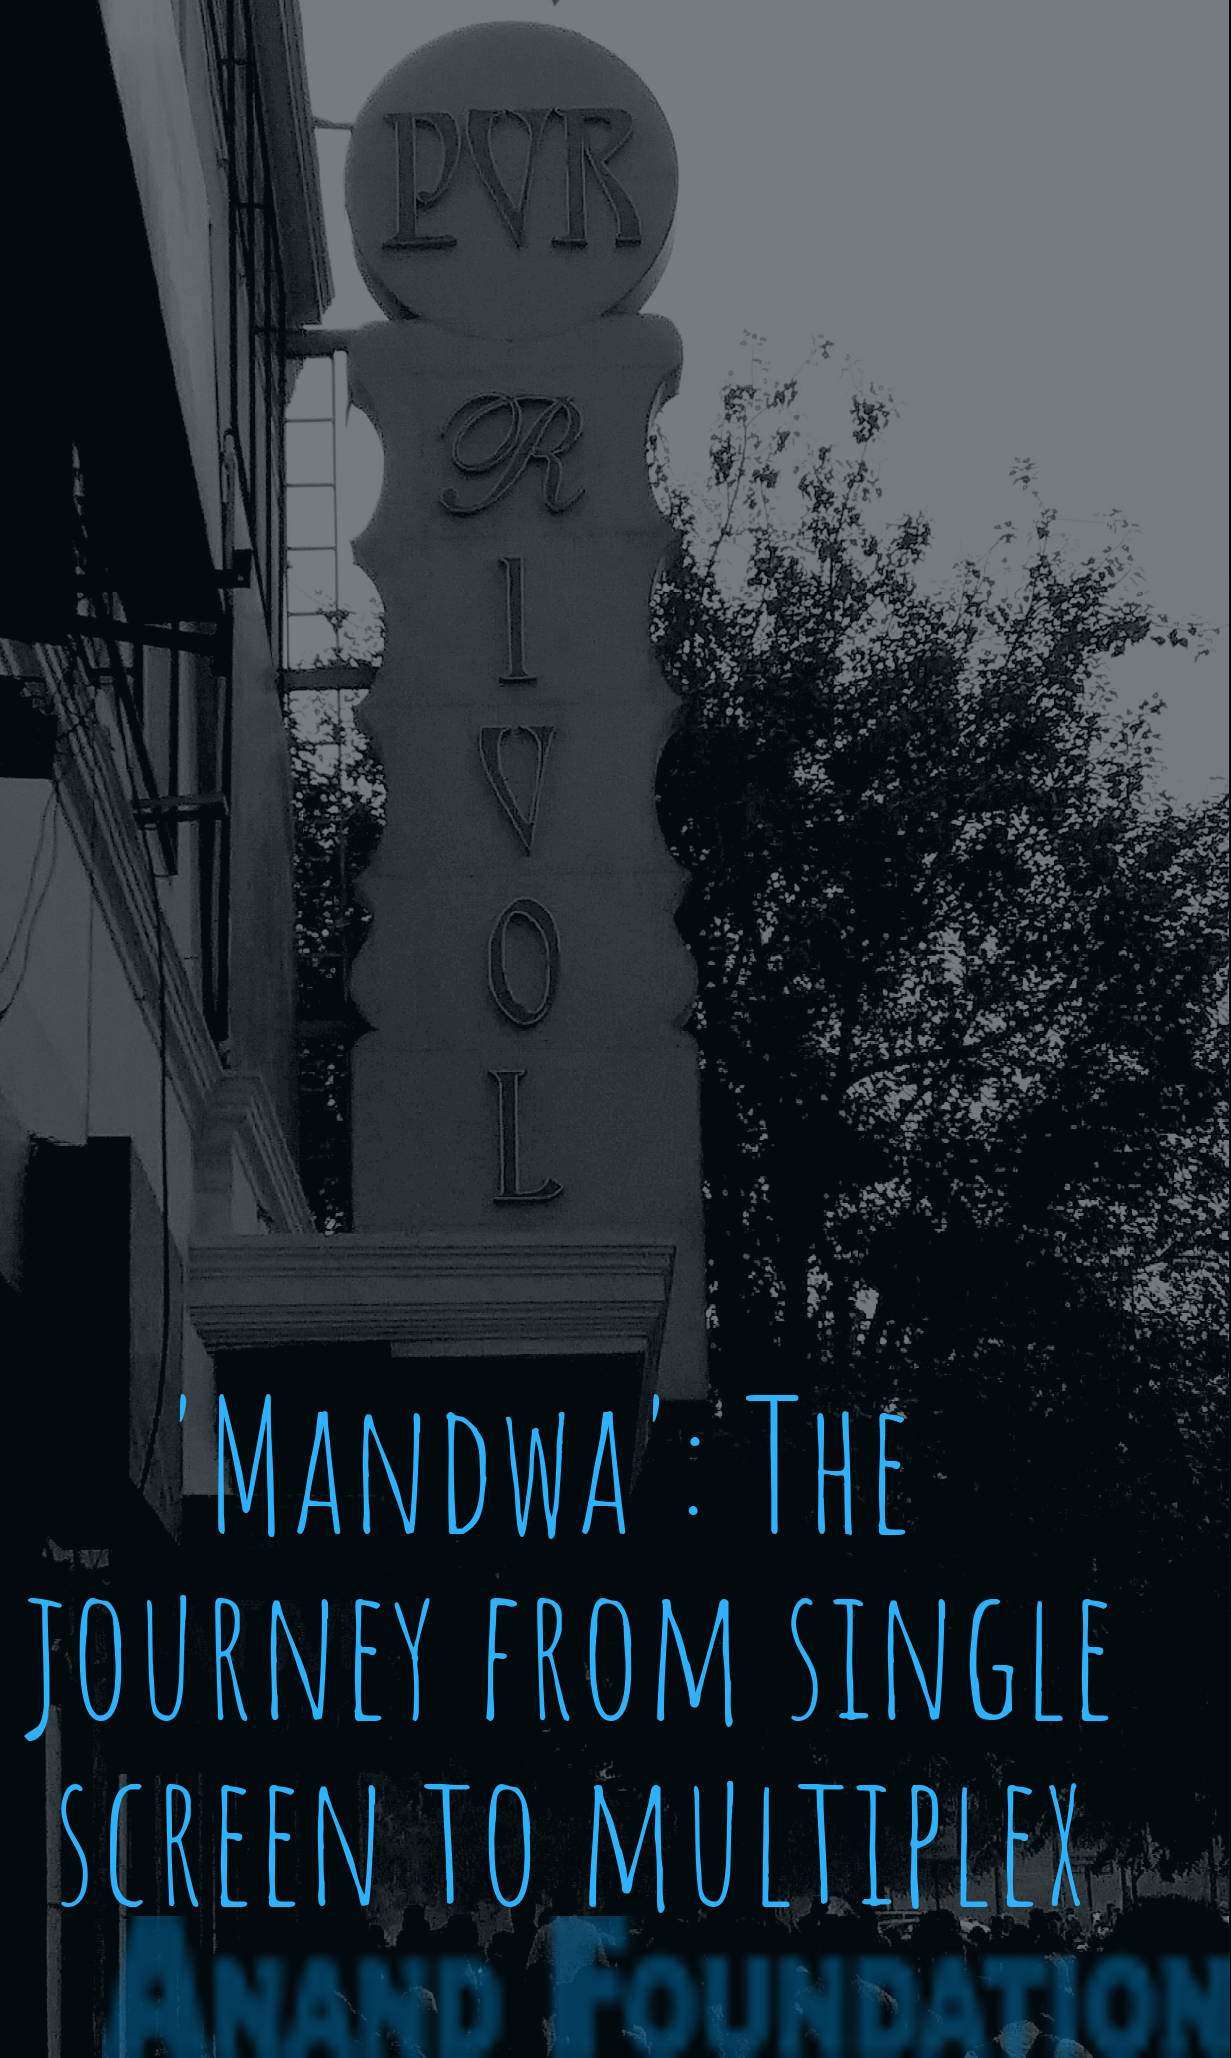 "Mandwa" the journey from single screen to multiplex